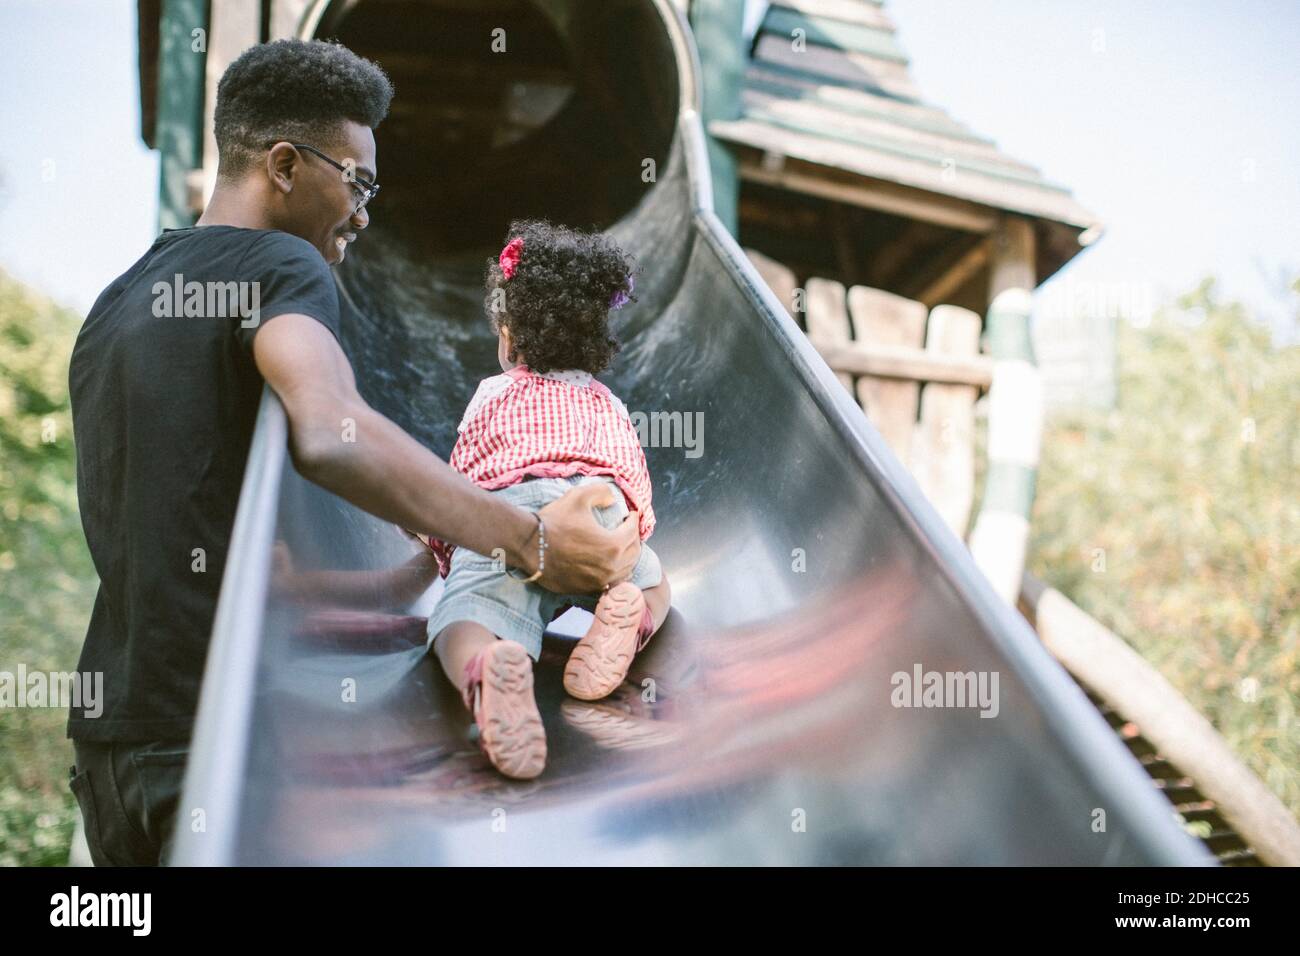 Father supporting daughter crawling up on slide at playground Stock Photo